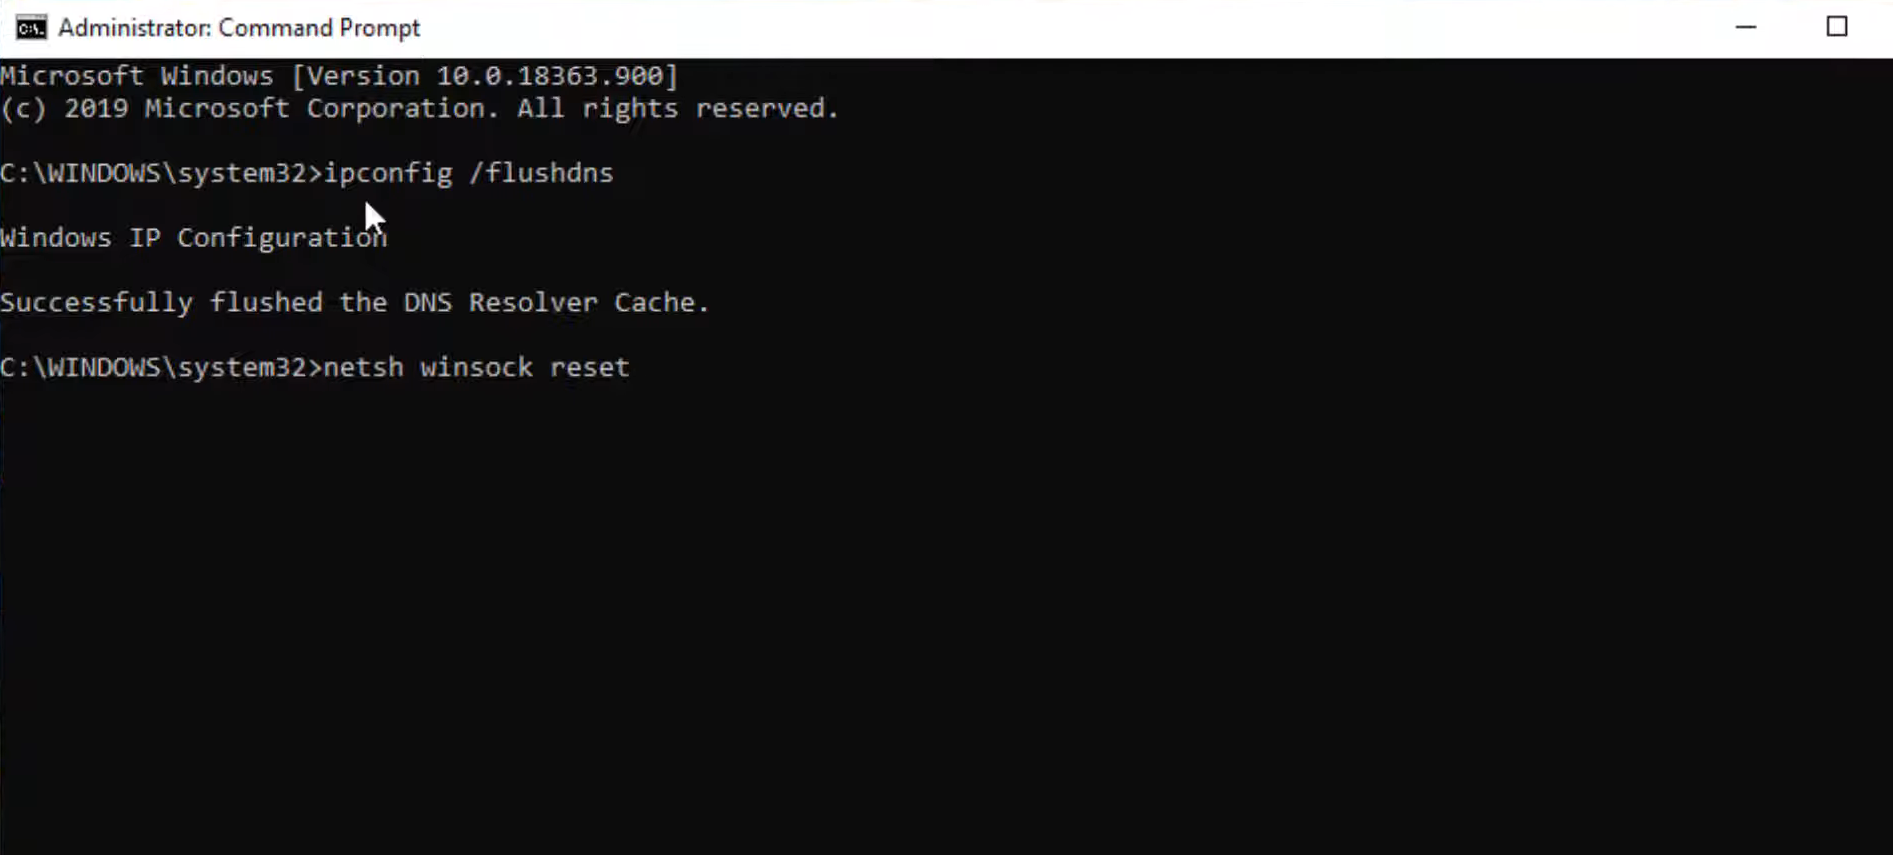 After that, input the "netsh winsock reset" command and press the enter button to execute it. 